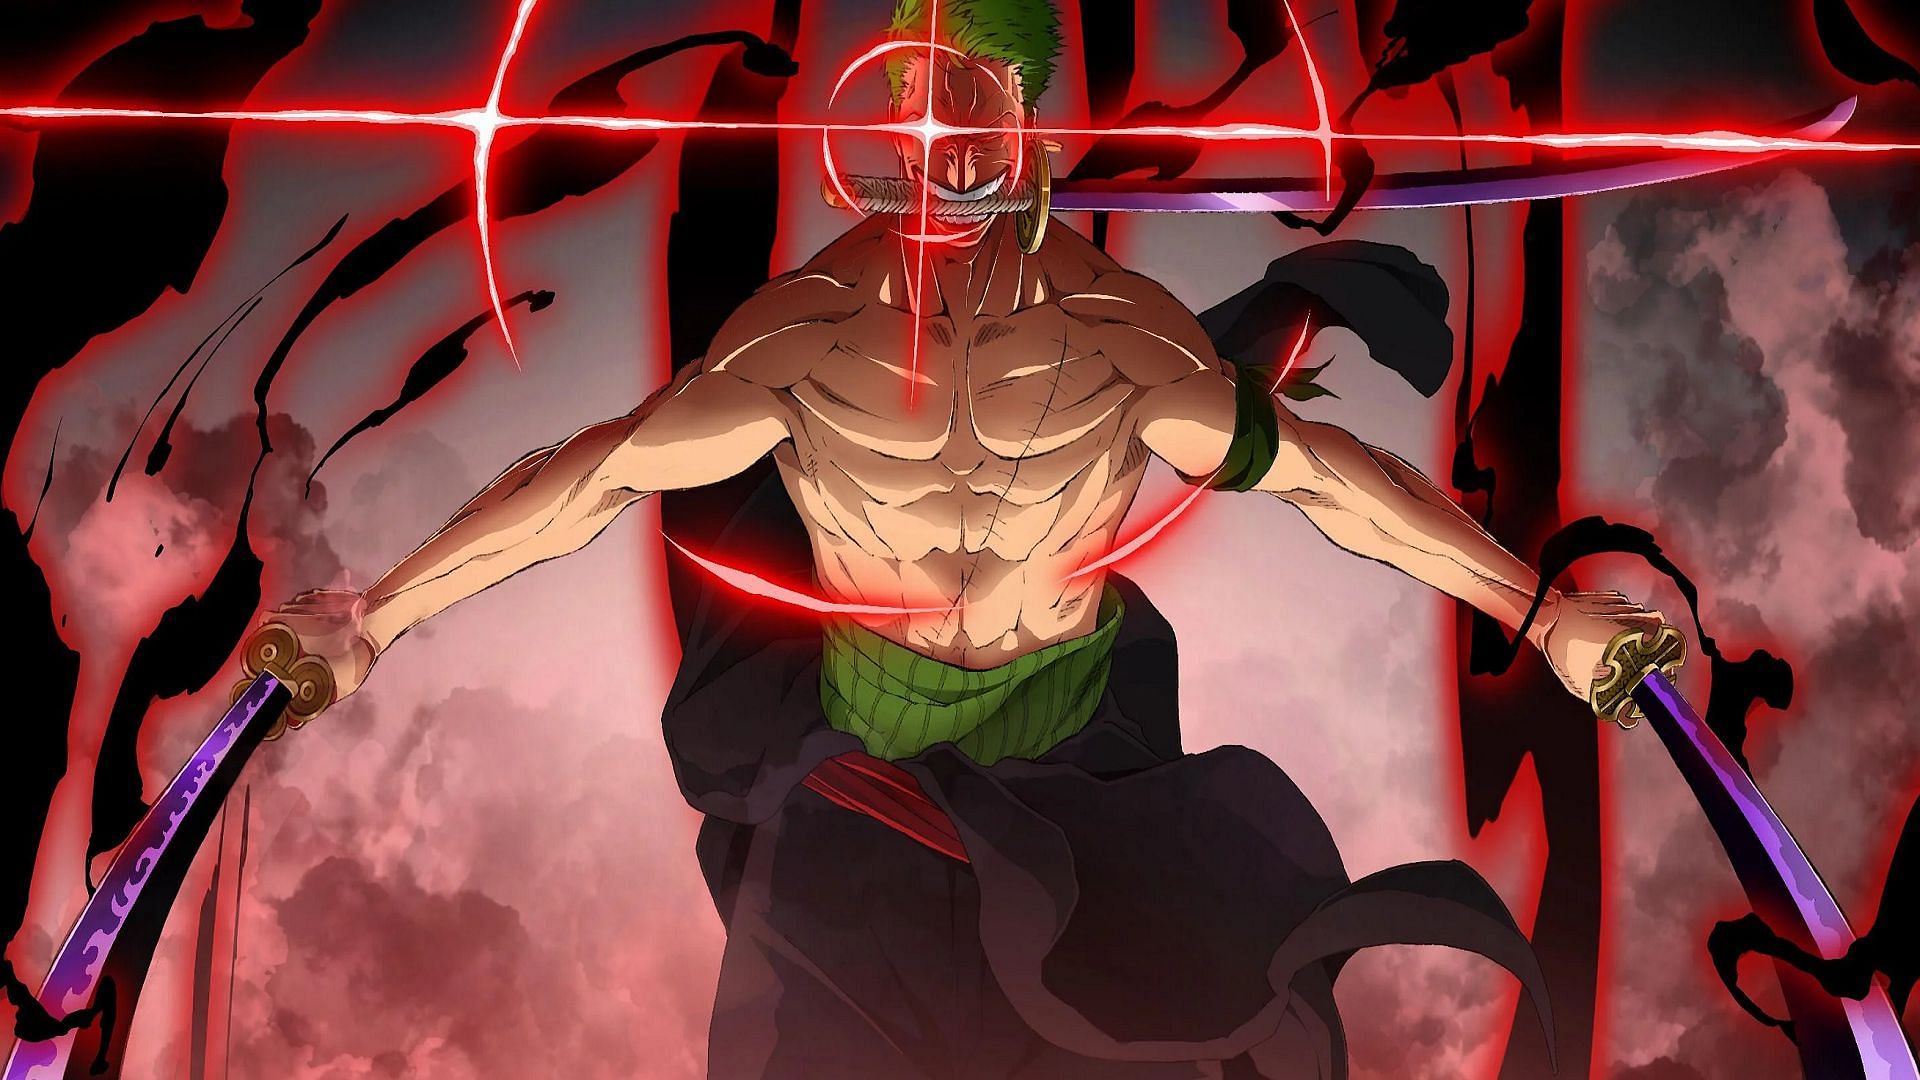 With the One Piece series nearing its end, fans can&#039;t wait to learn everything about Zoro&#039;s backstory (Image via Eiichiro Oda/Shueisha, One Piece)